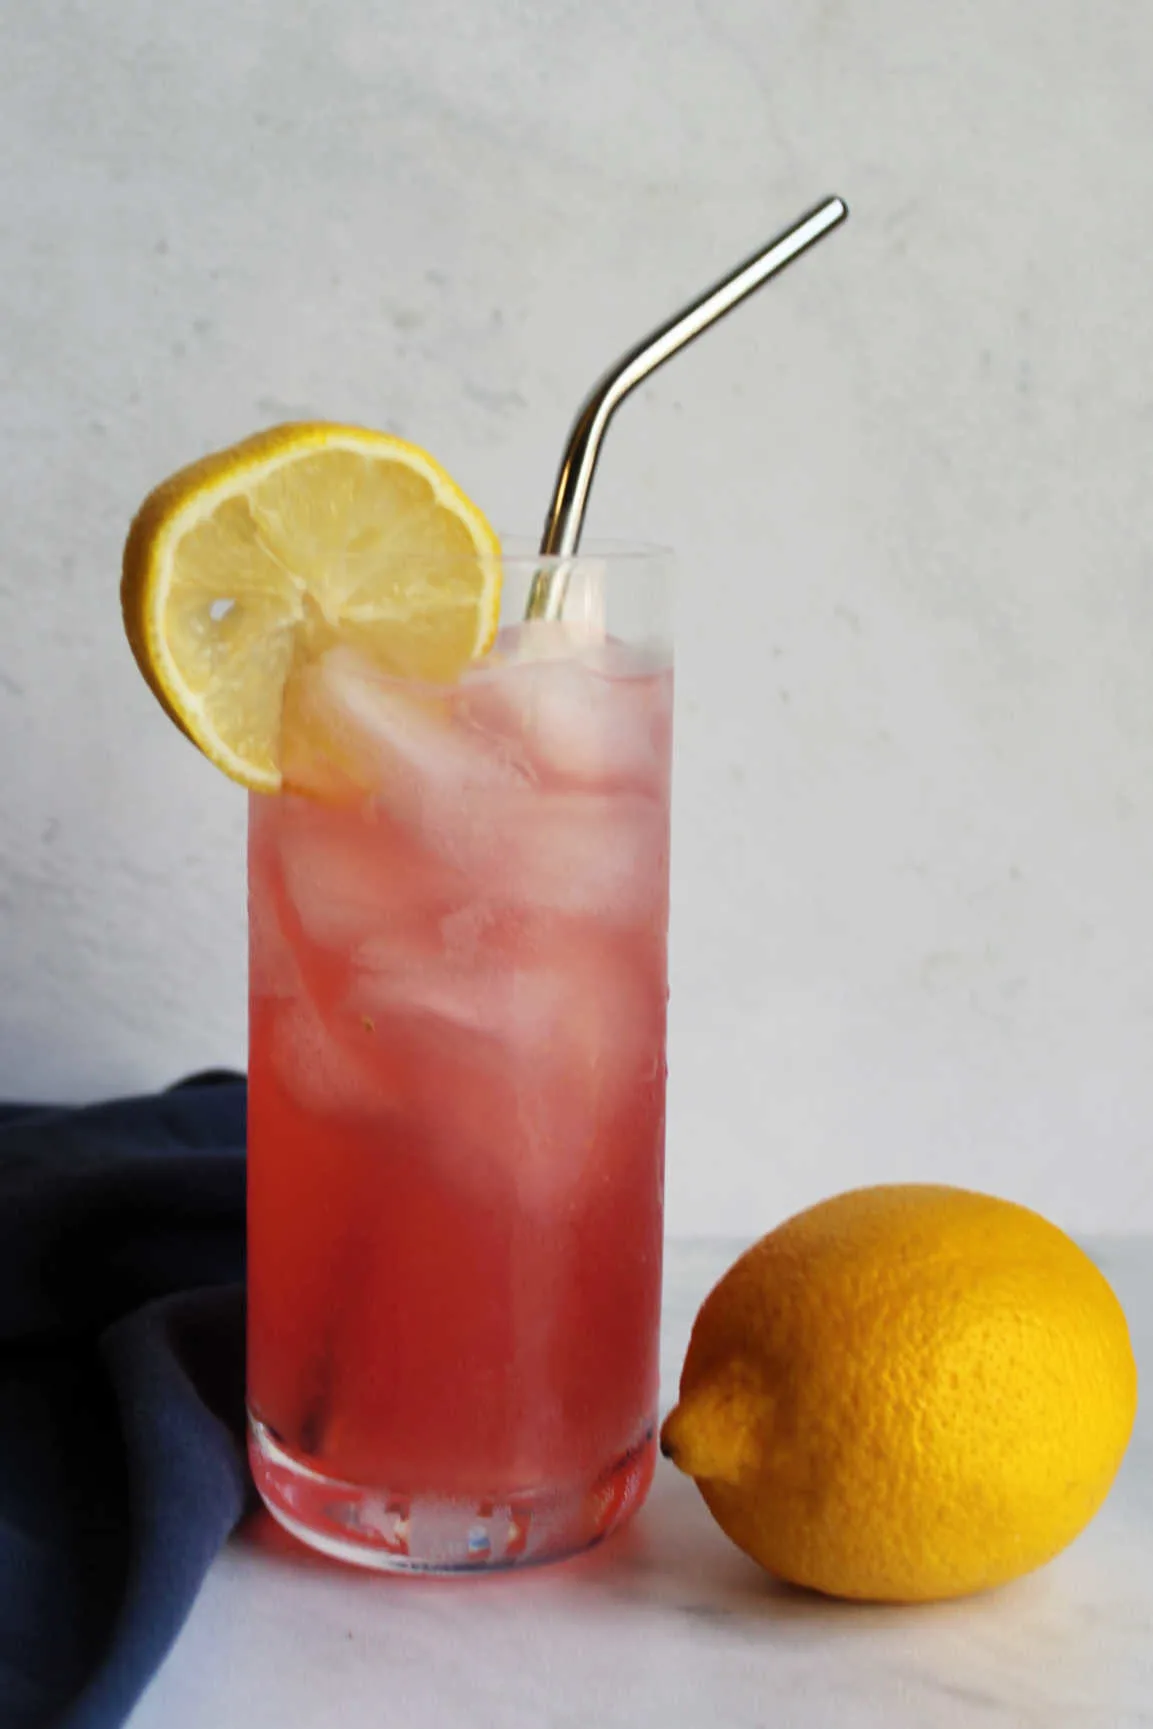 Single glass of pink lemonade in tall collins glass with metal straw next to a whole lemon.